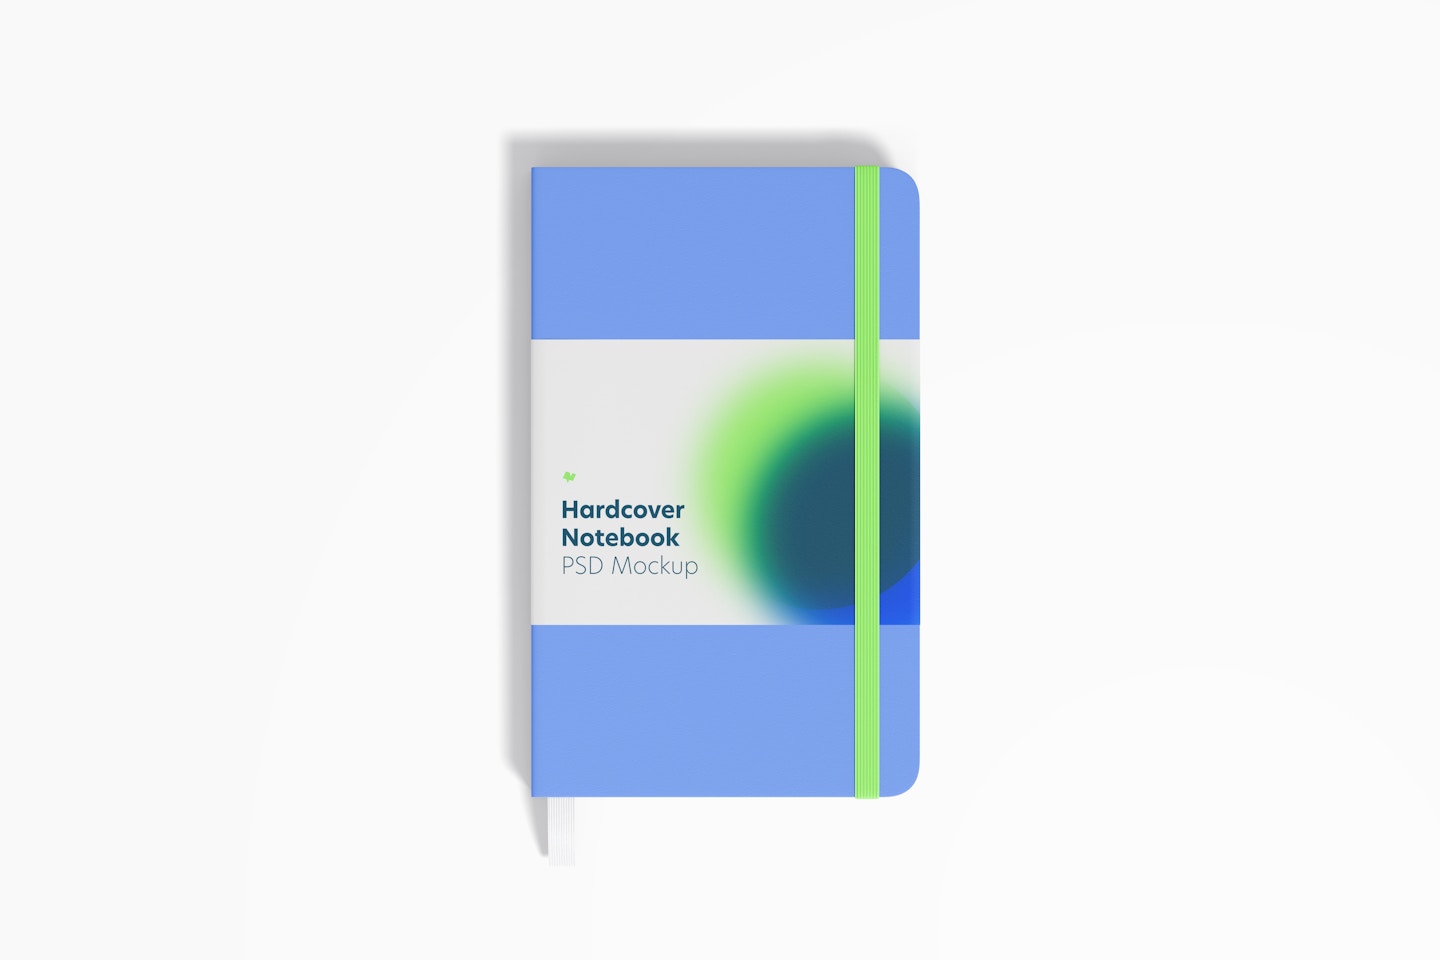 Hardcover Notebooks with Elastic Band Mockup, Front View